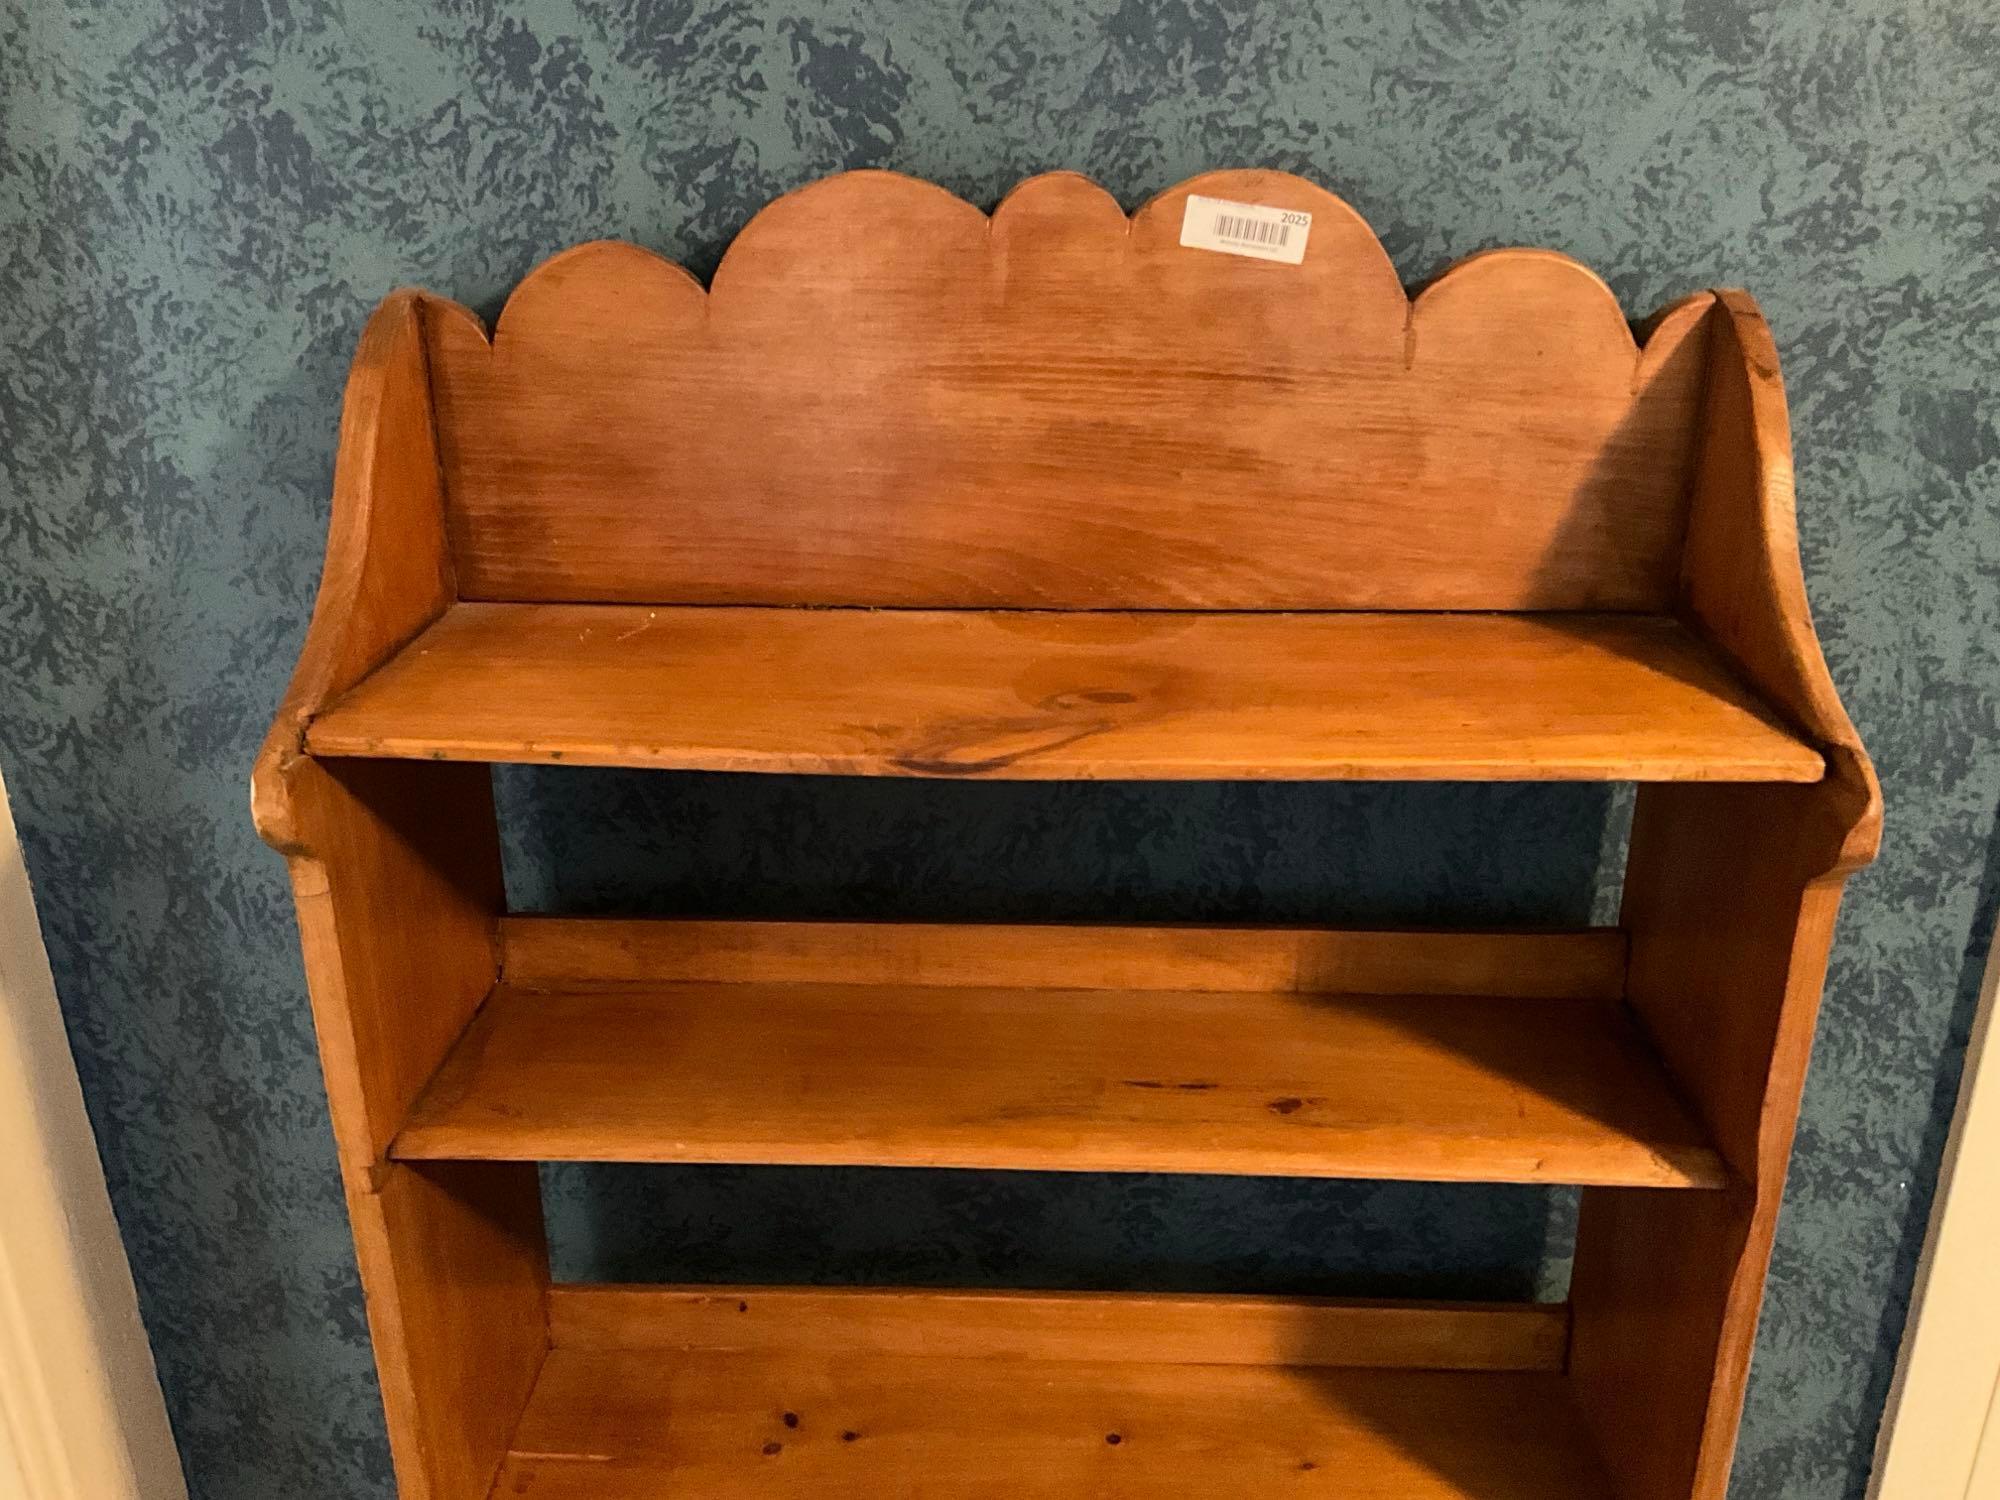 Early Wooden Bookcase with Scallop top